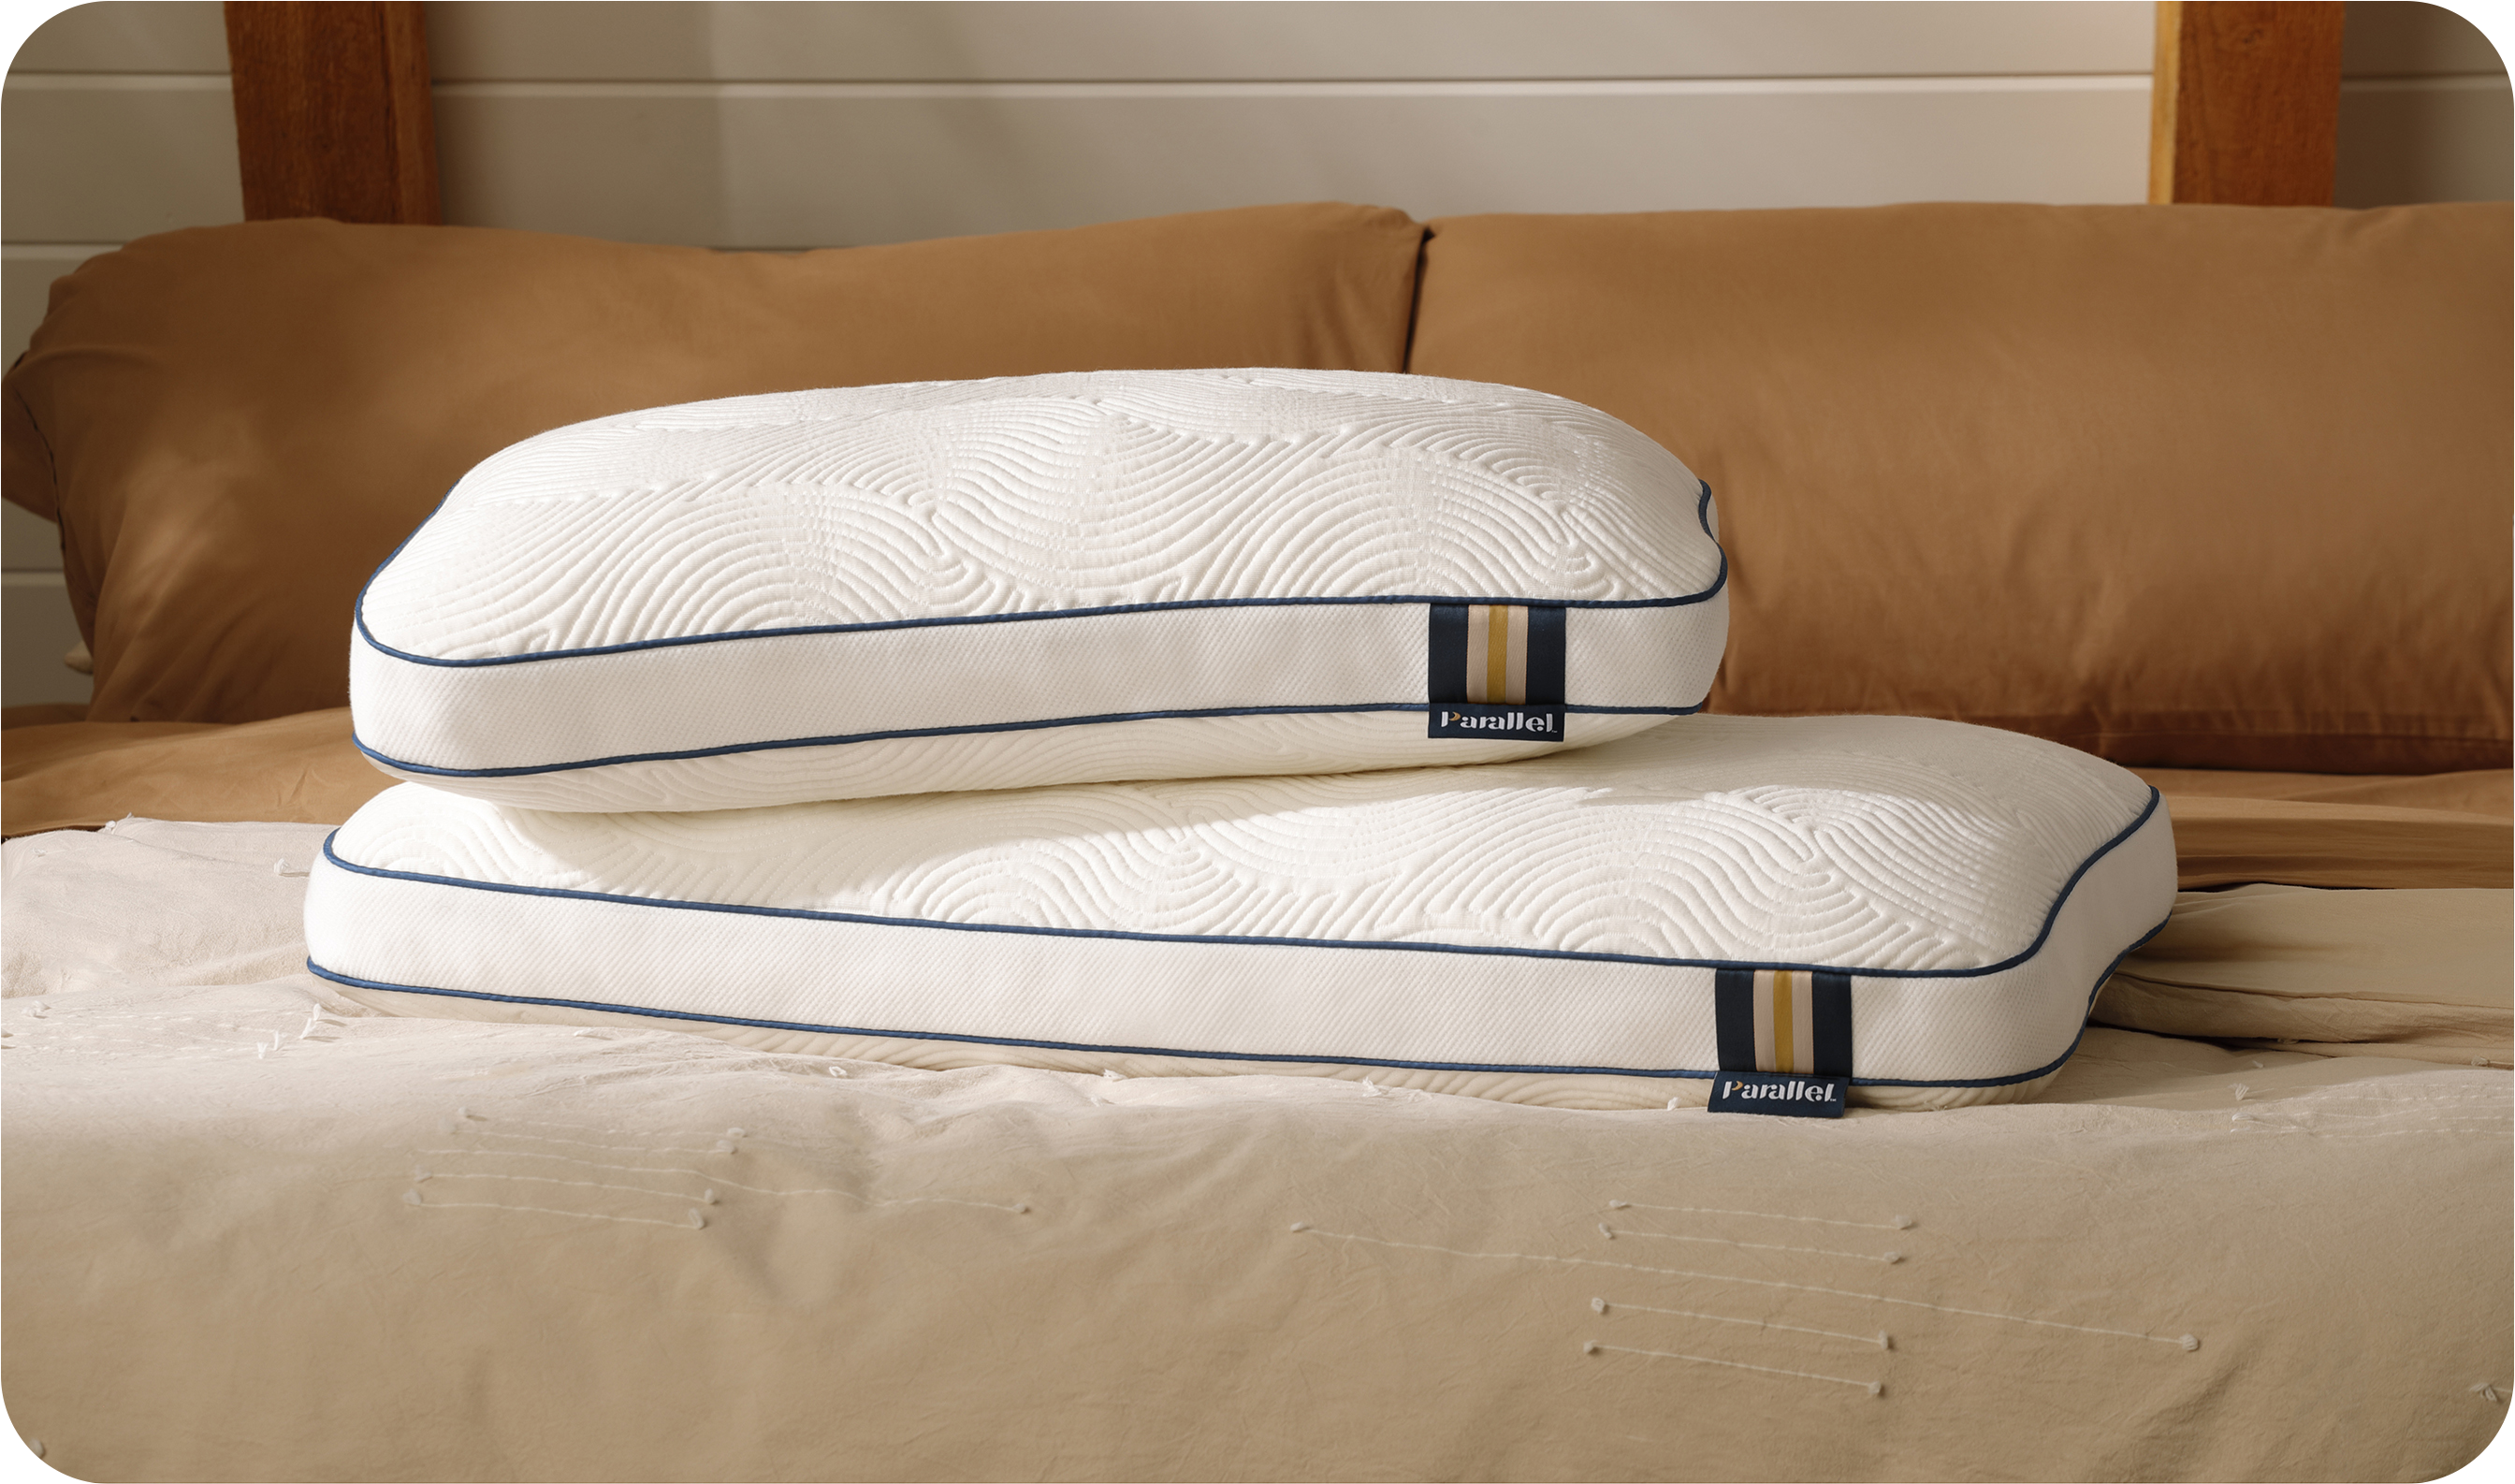 2 high profile high-end pillows stacked on stylish bed